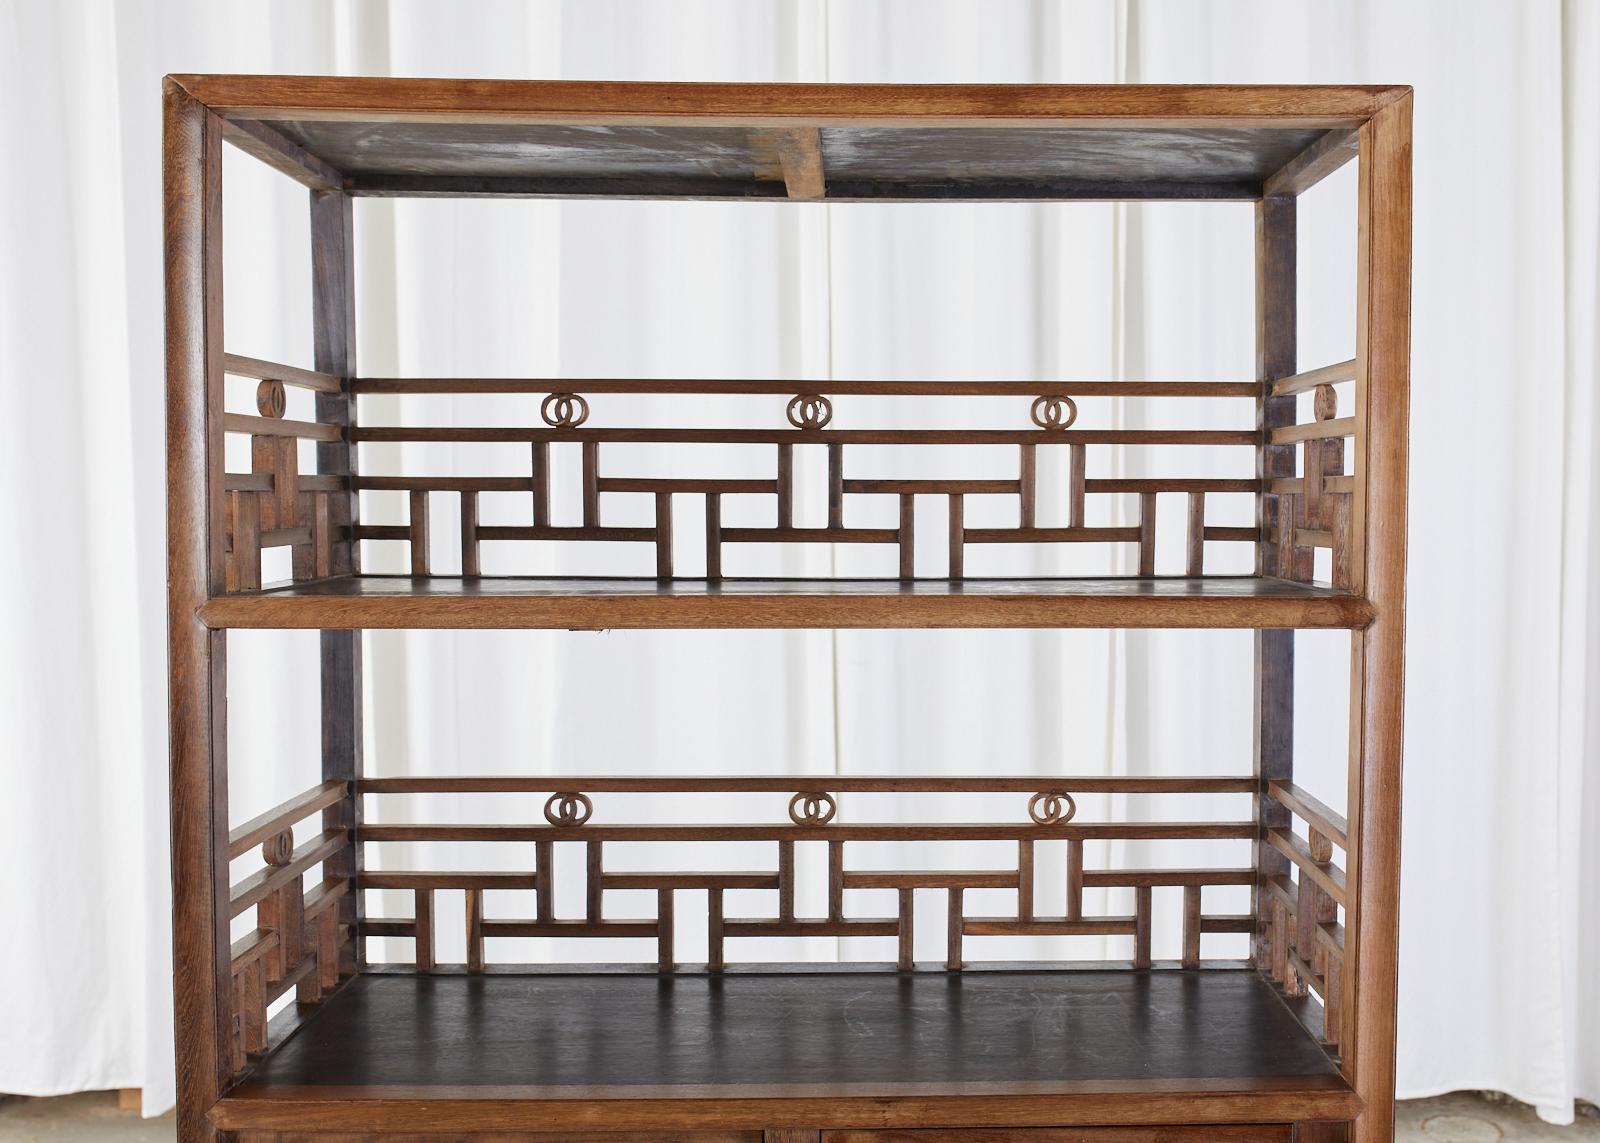 20th Century Chinese Export Elm Bookcase or Scholars Display Shelf Étagère